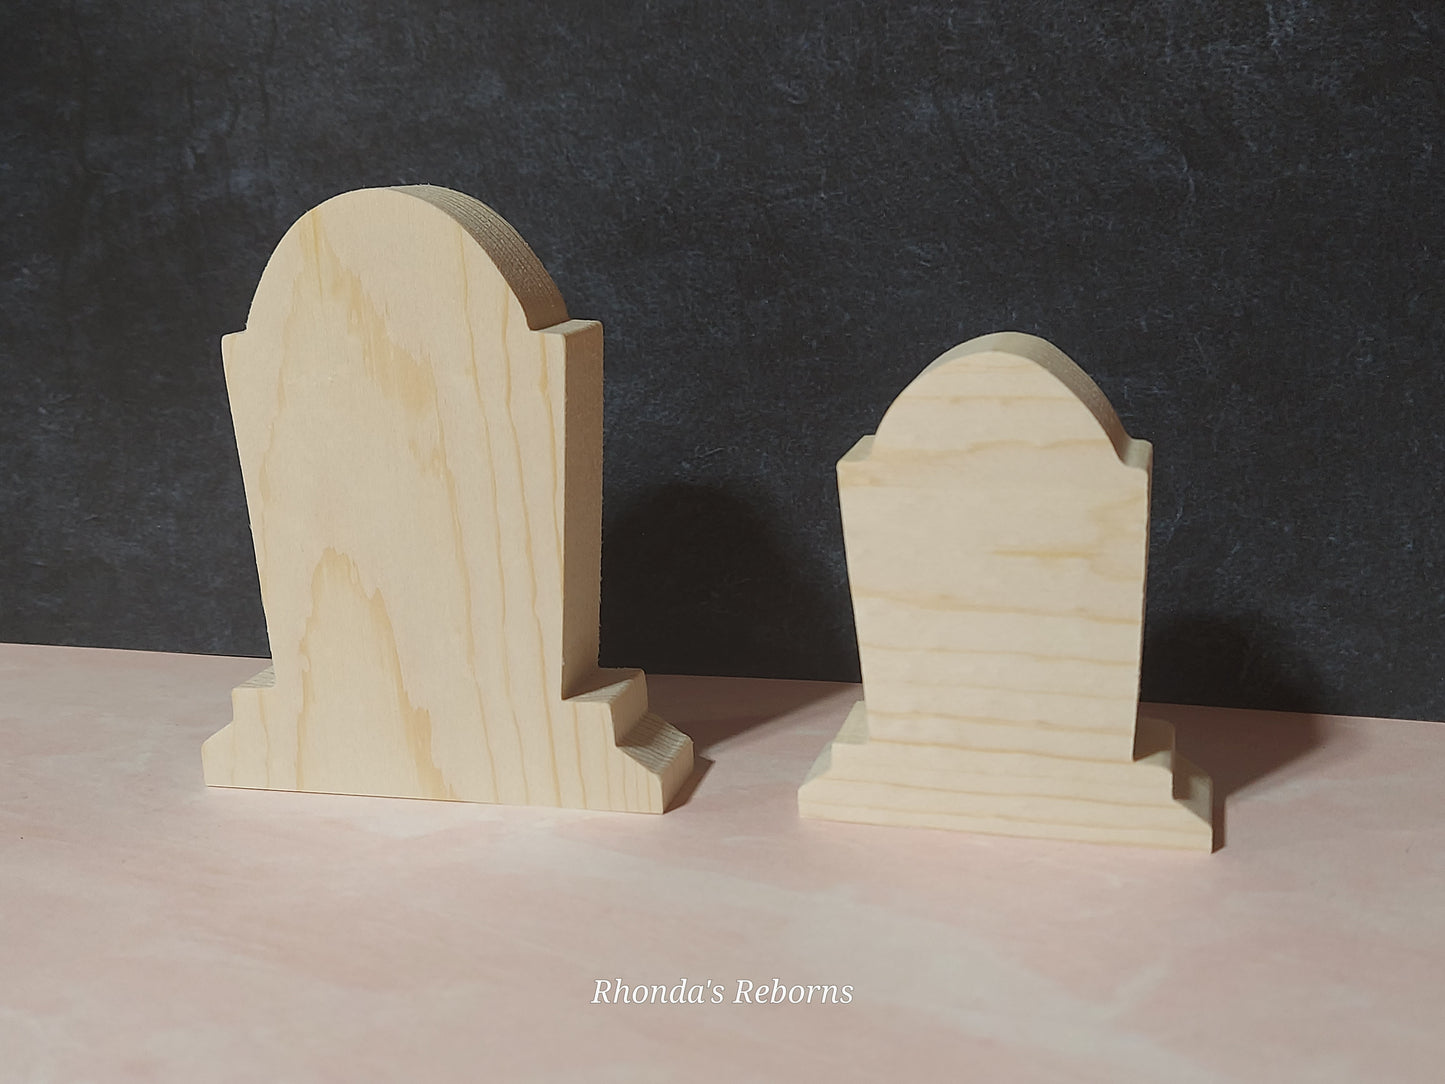 Unfinished Wooden Tombstone Cutout